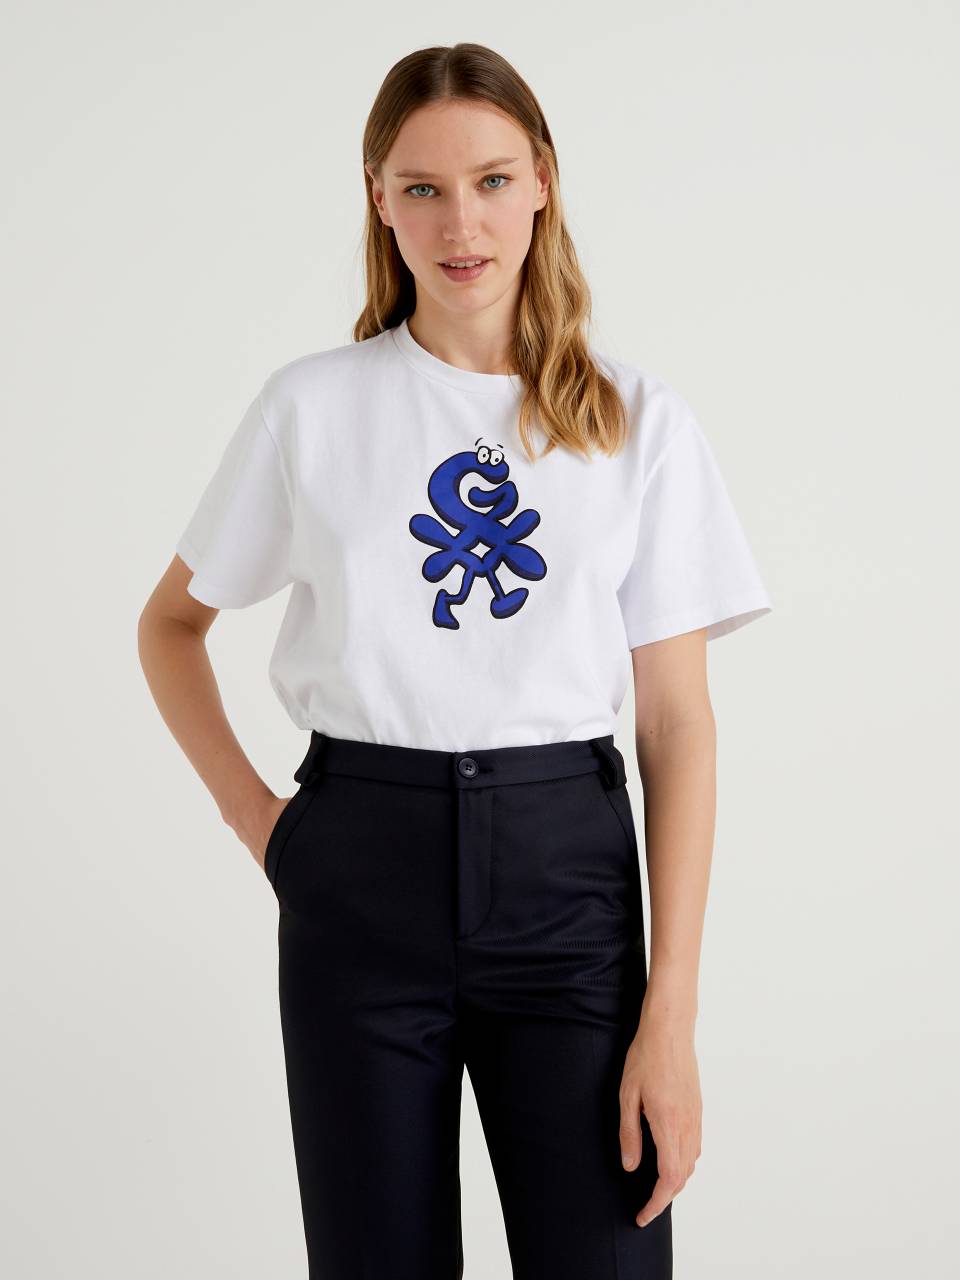 Benetton White t-shirt with print and embroidery by Ghali. 1